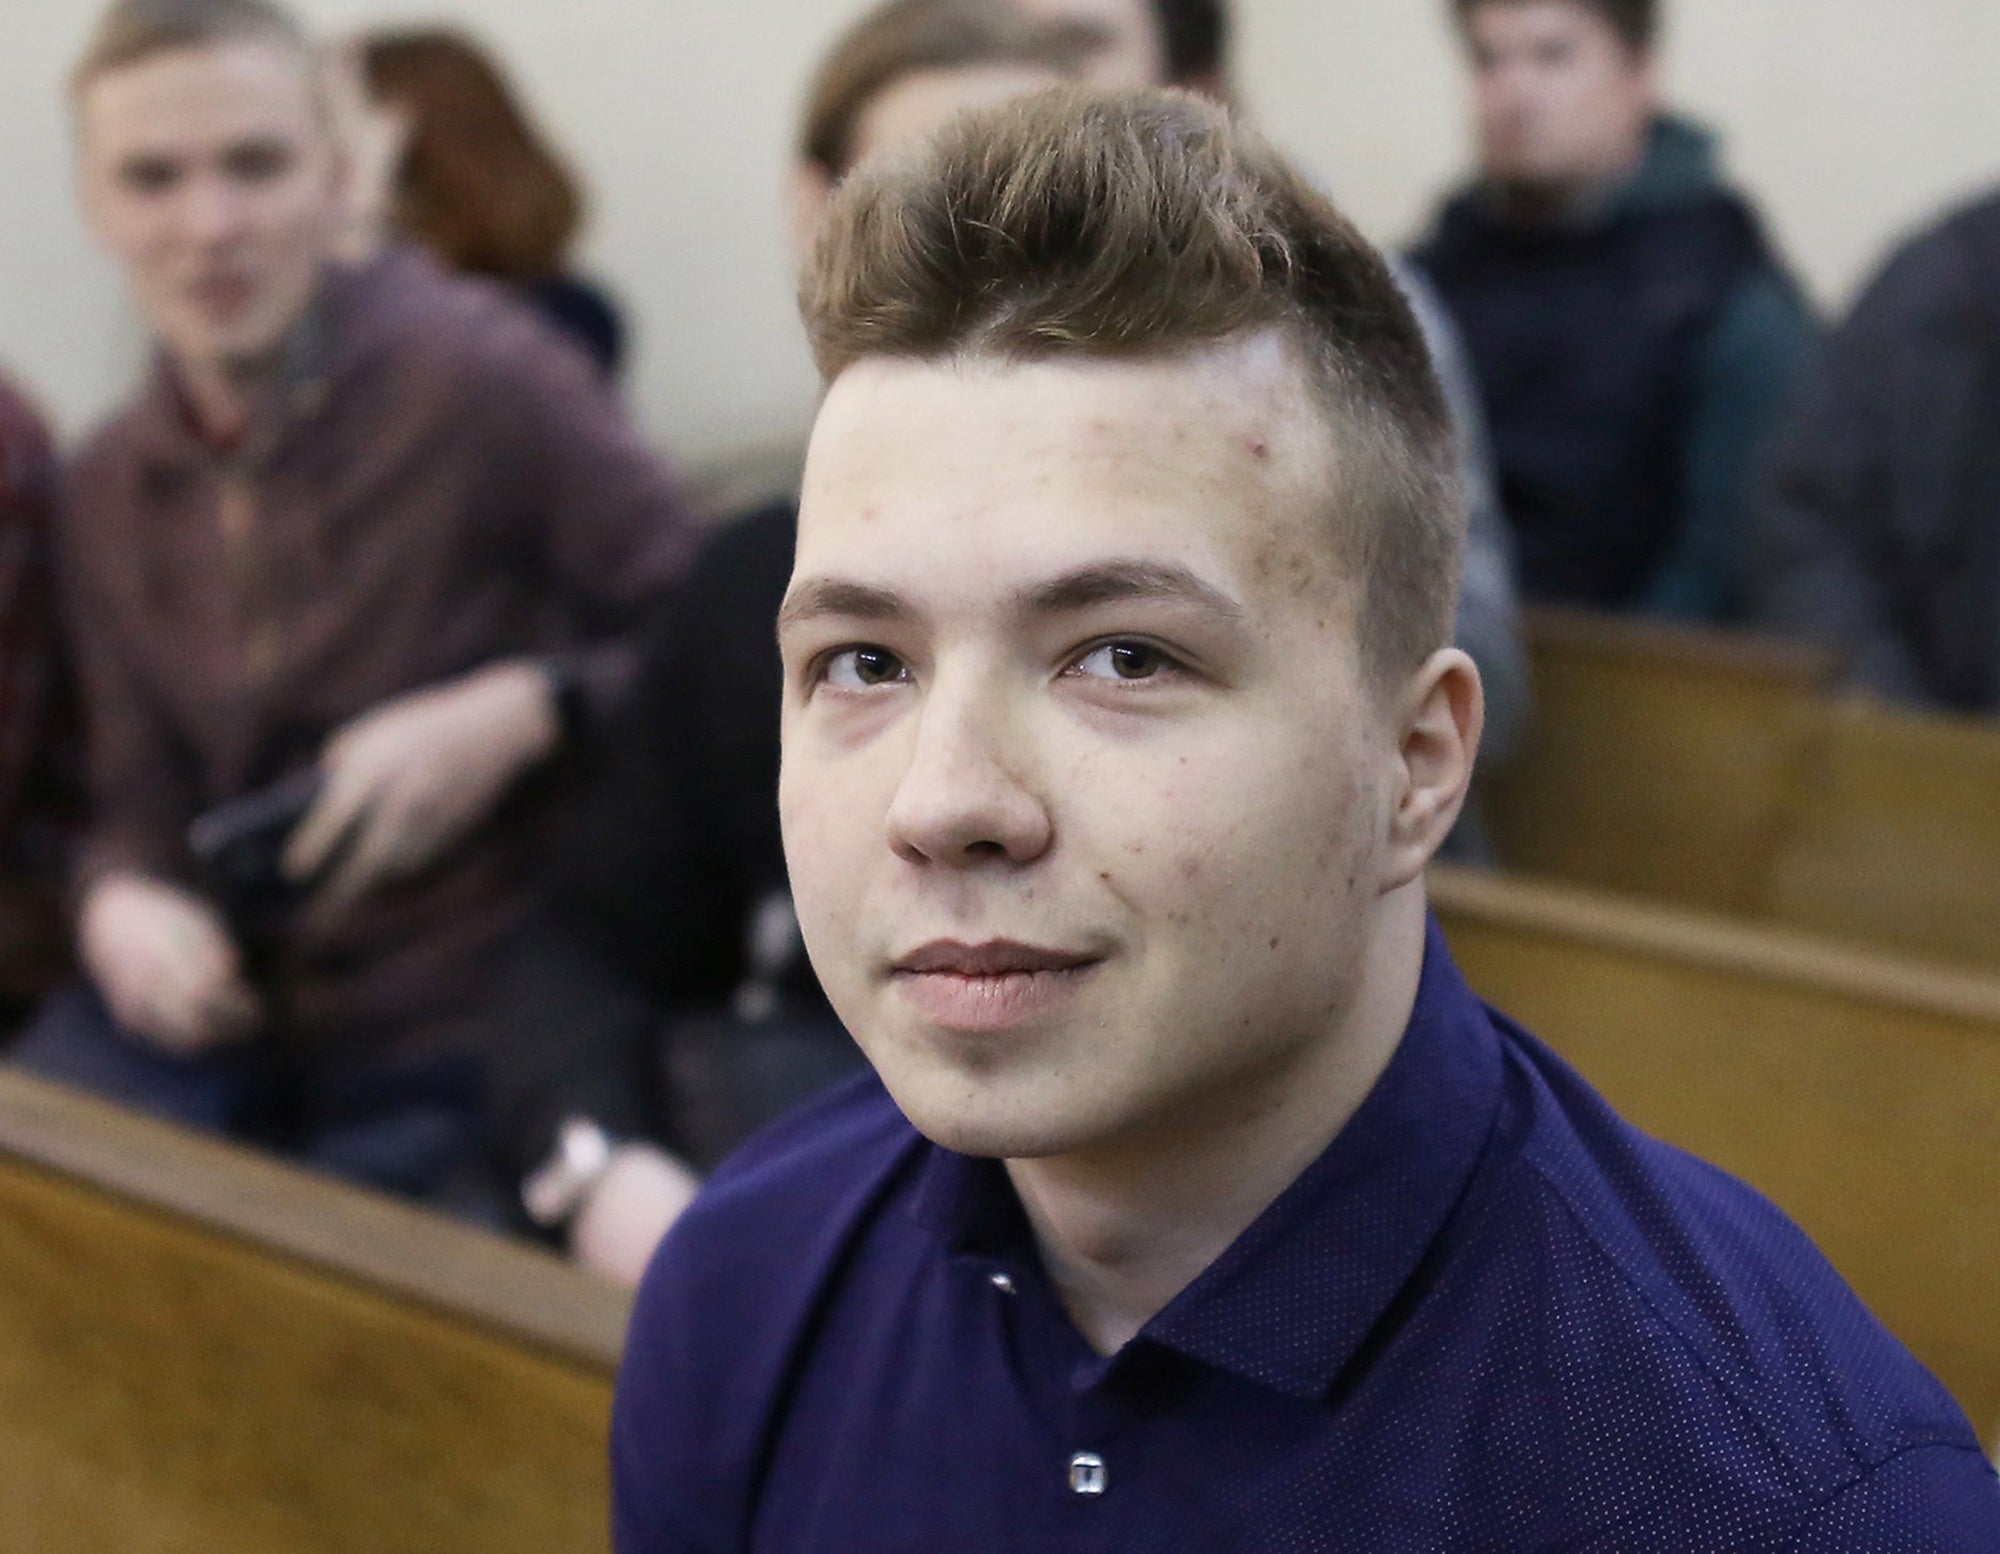 Opposition blogger and activist Roman Protasevich’s flight was ordered to land in Minsk